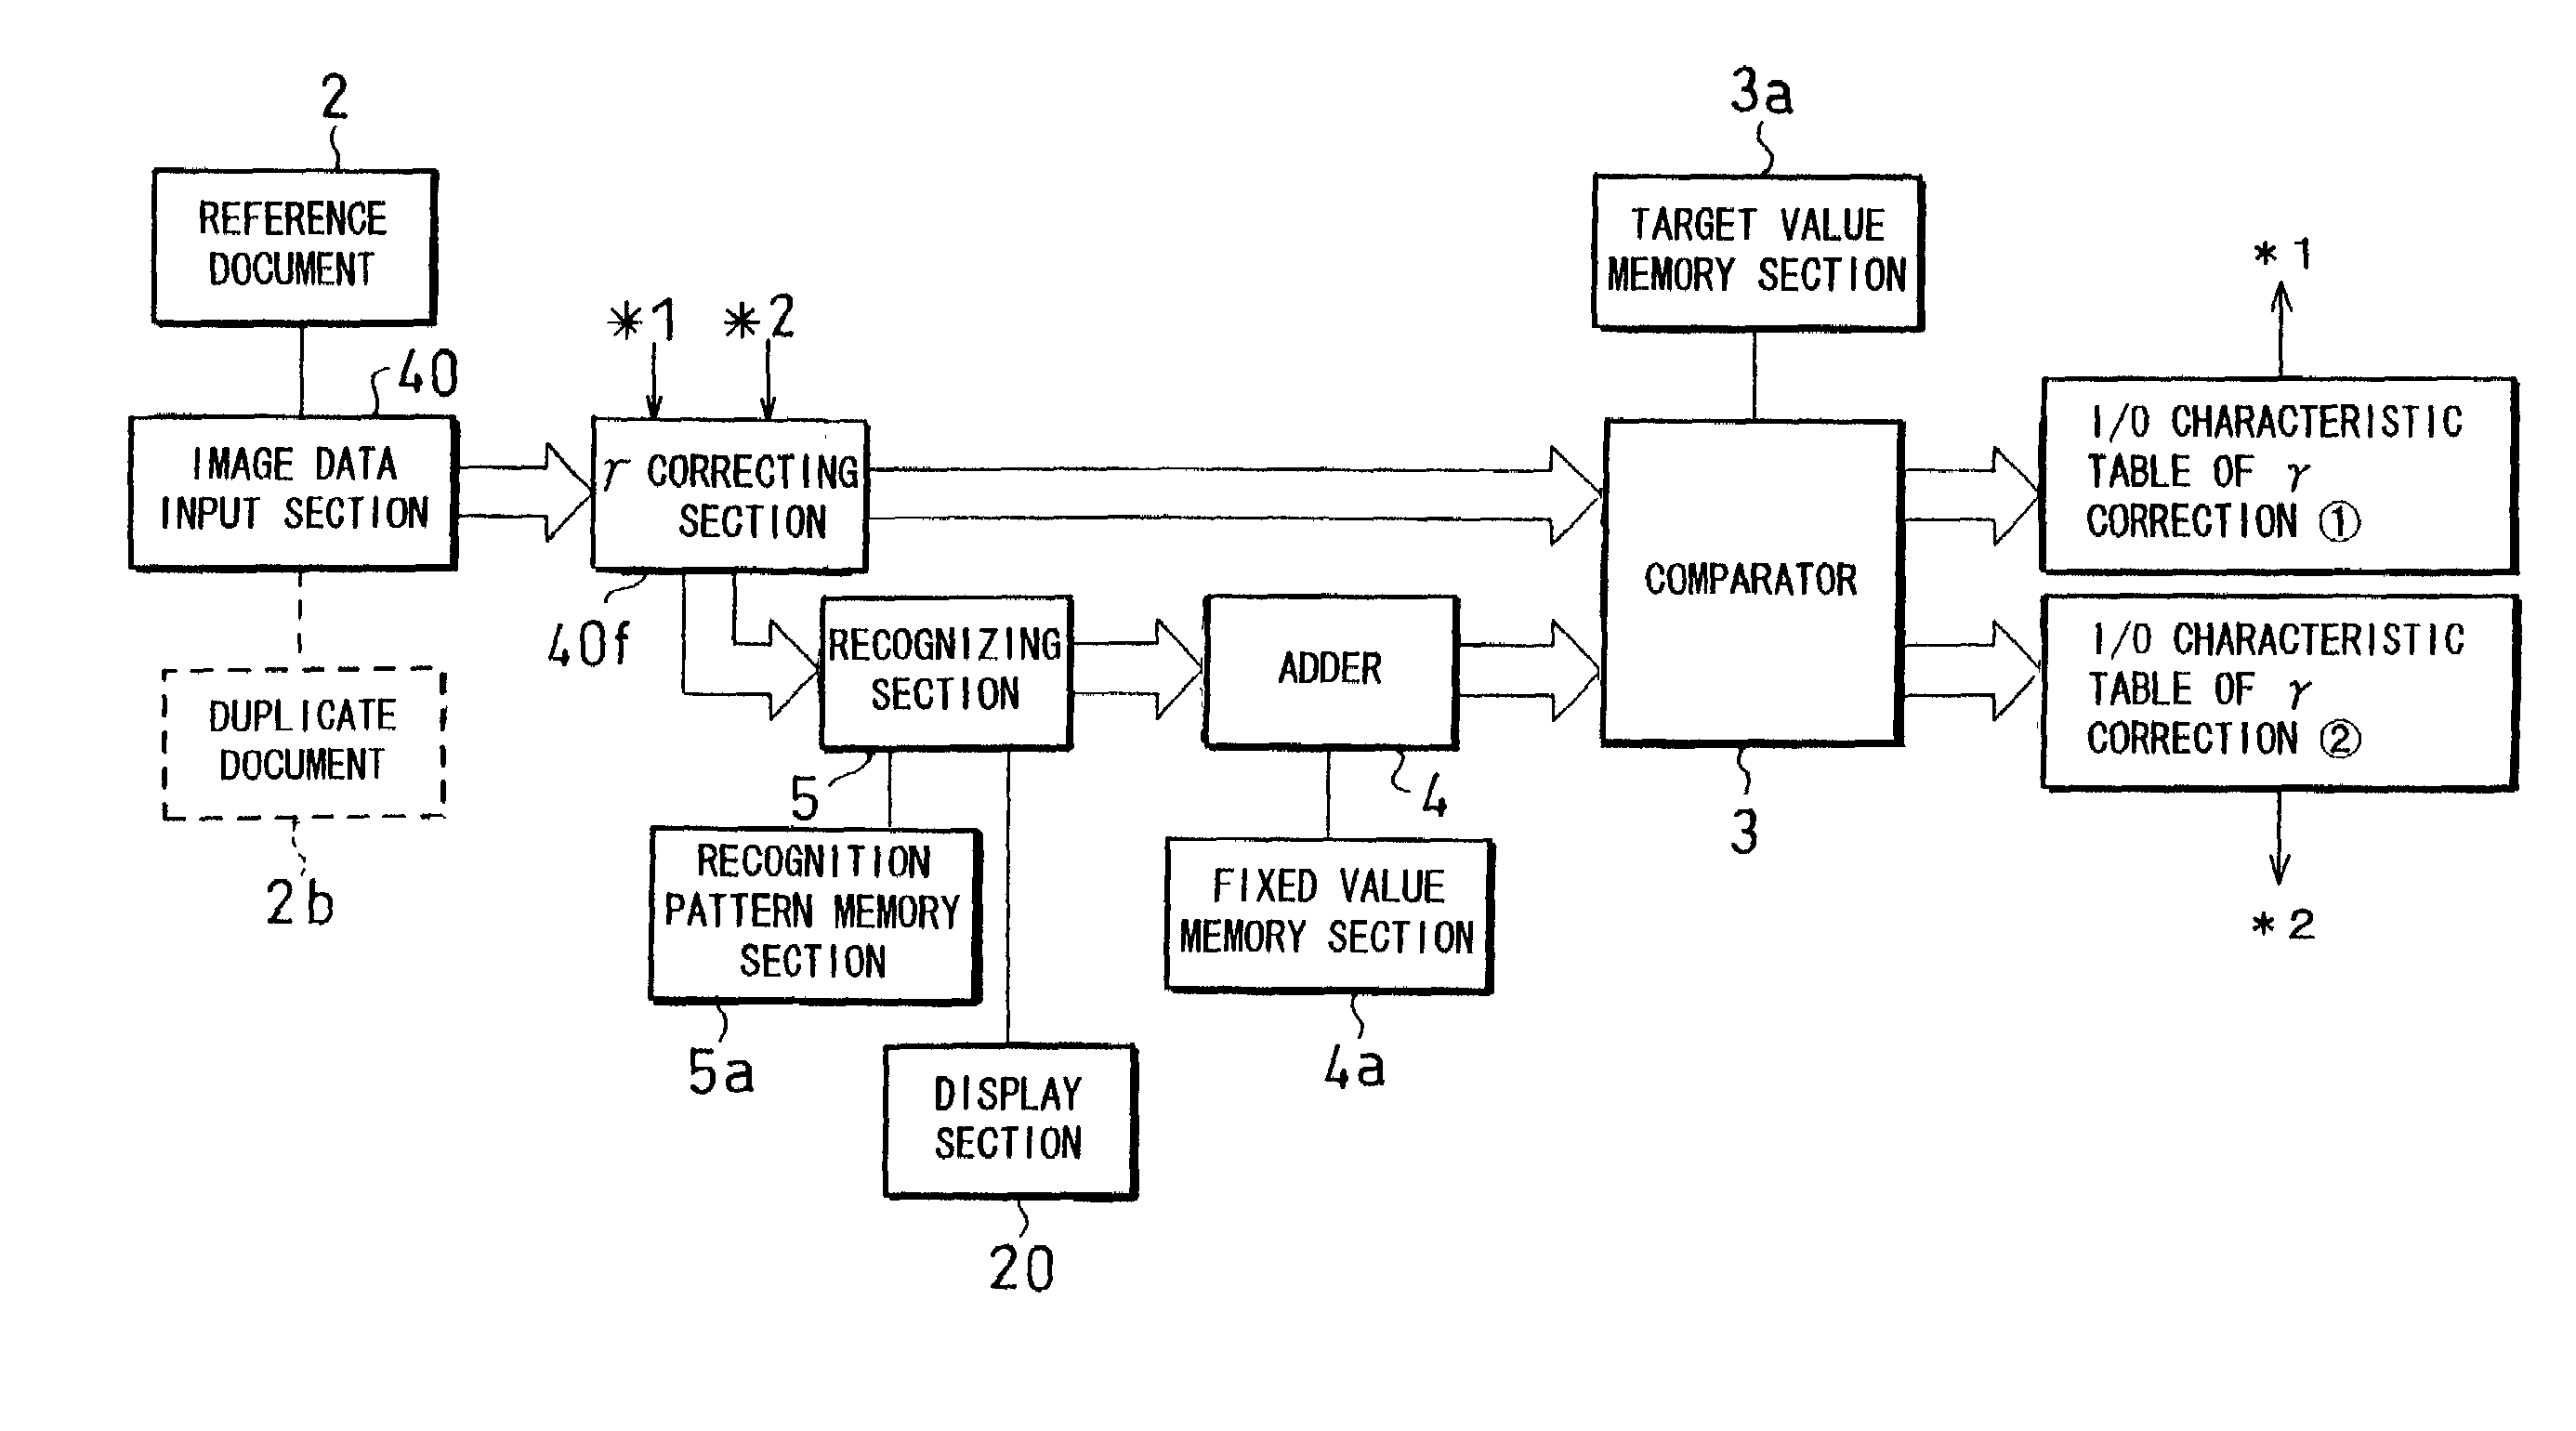 Image processing apparatus and method for the fast and accurate calibration of the same using actual and pseudo reference image data